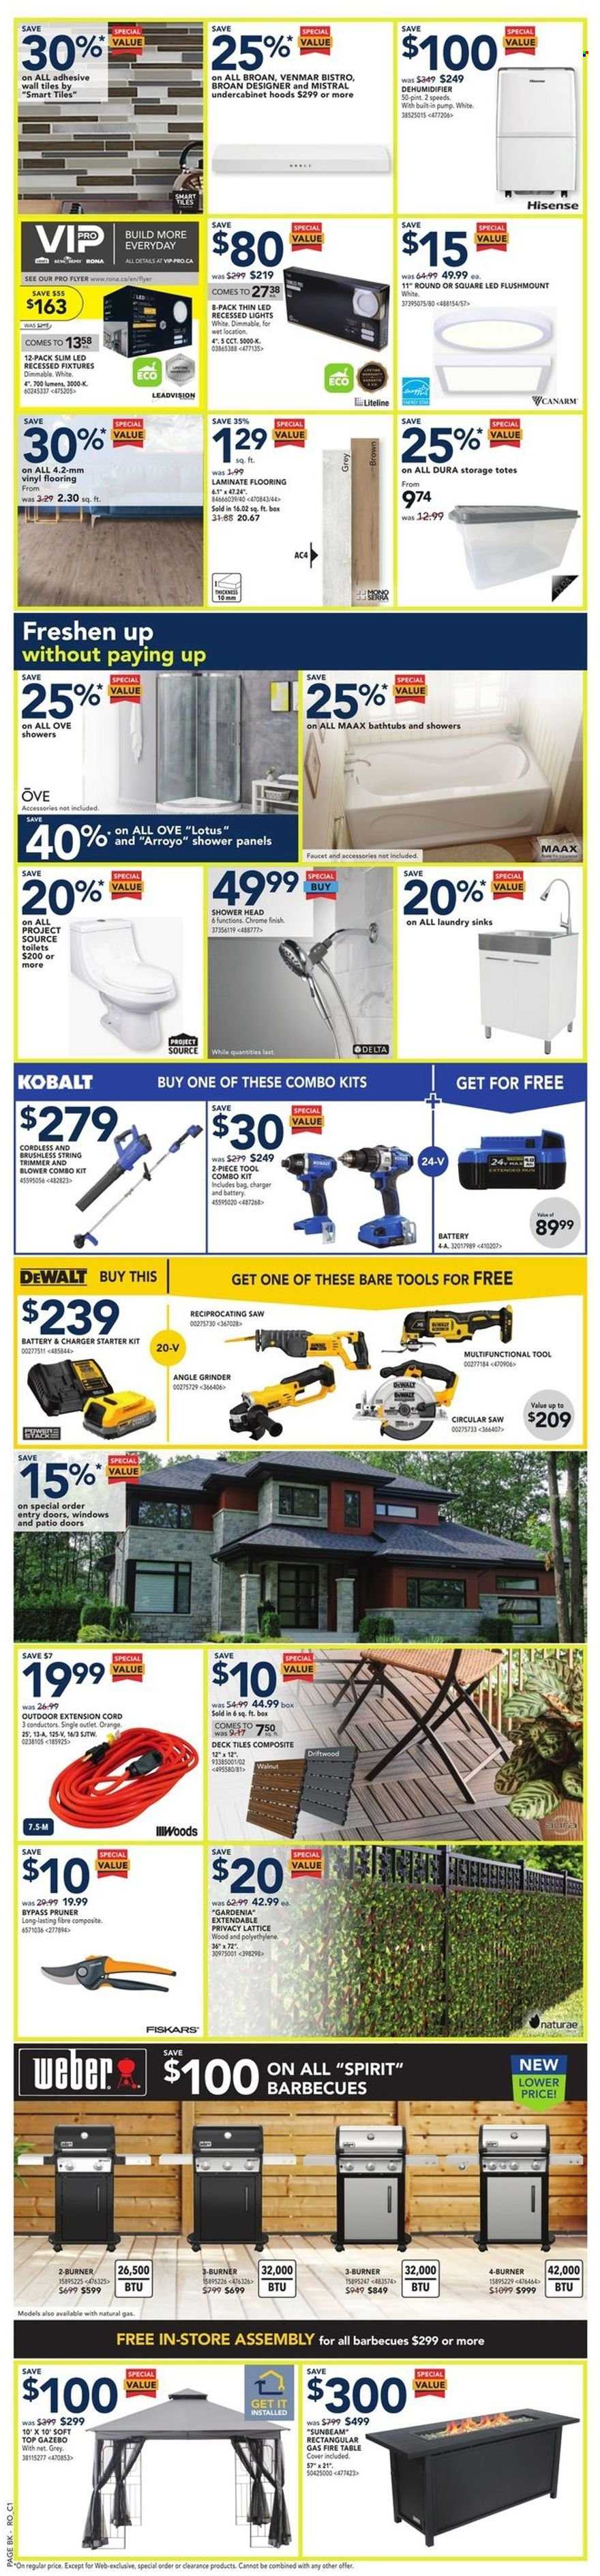 thumbnail - RONA Flyer - March 23, 2023 - March 29, 2023 - Sales products - Fiskars, Sunbeam, Hisense, grinder, trimmer, table, Lotus, tote, toilet, faucet, showerhead, adhesive, laminate floor, DeWALT, circular saw, saw, angle grinder, reciprocating saw, string trimmer, combo kit, extension cord, gazebo, Weber, pump. Page 2.